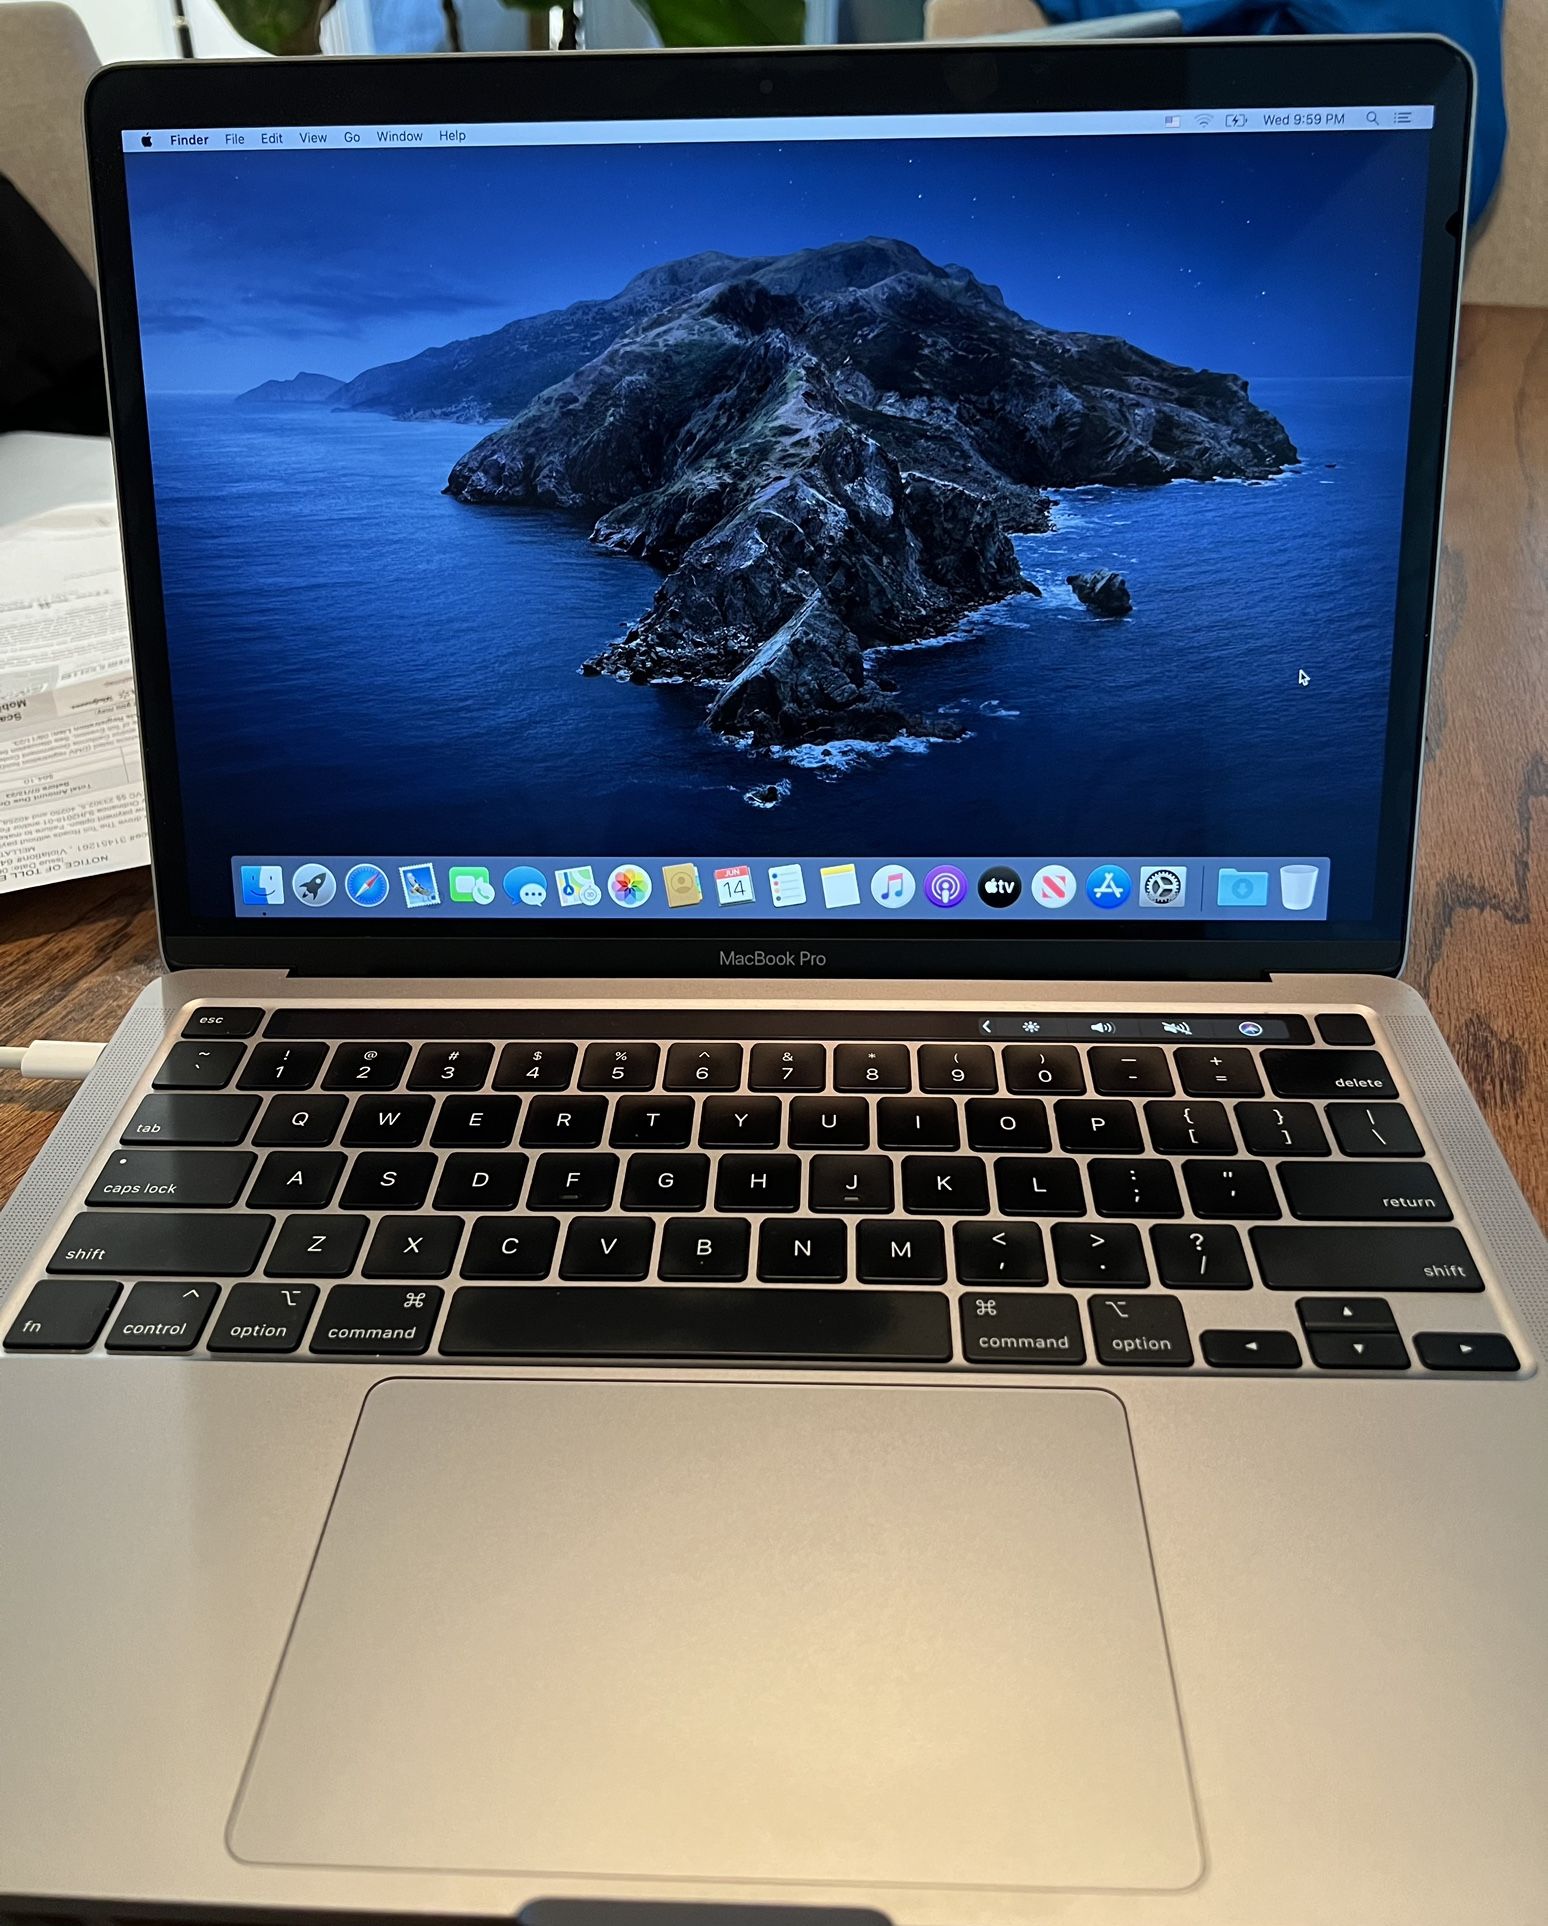 MacBook Pro (13-inch, 2020, Four Thunderbolt 3 ports) for Sale in